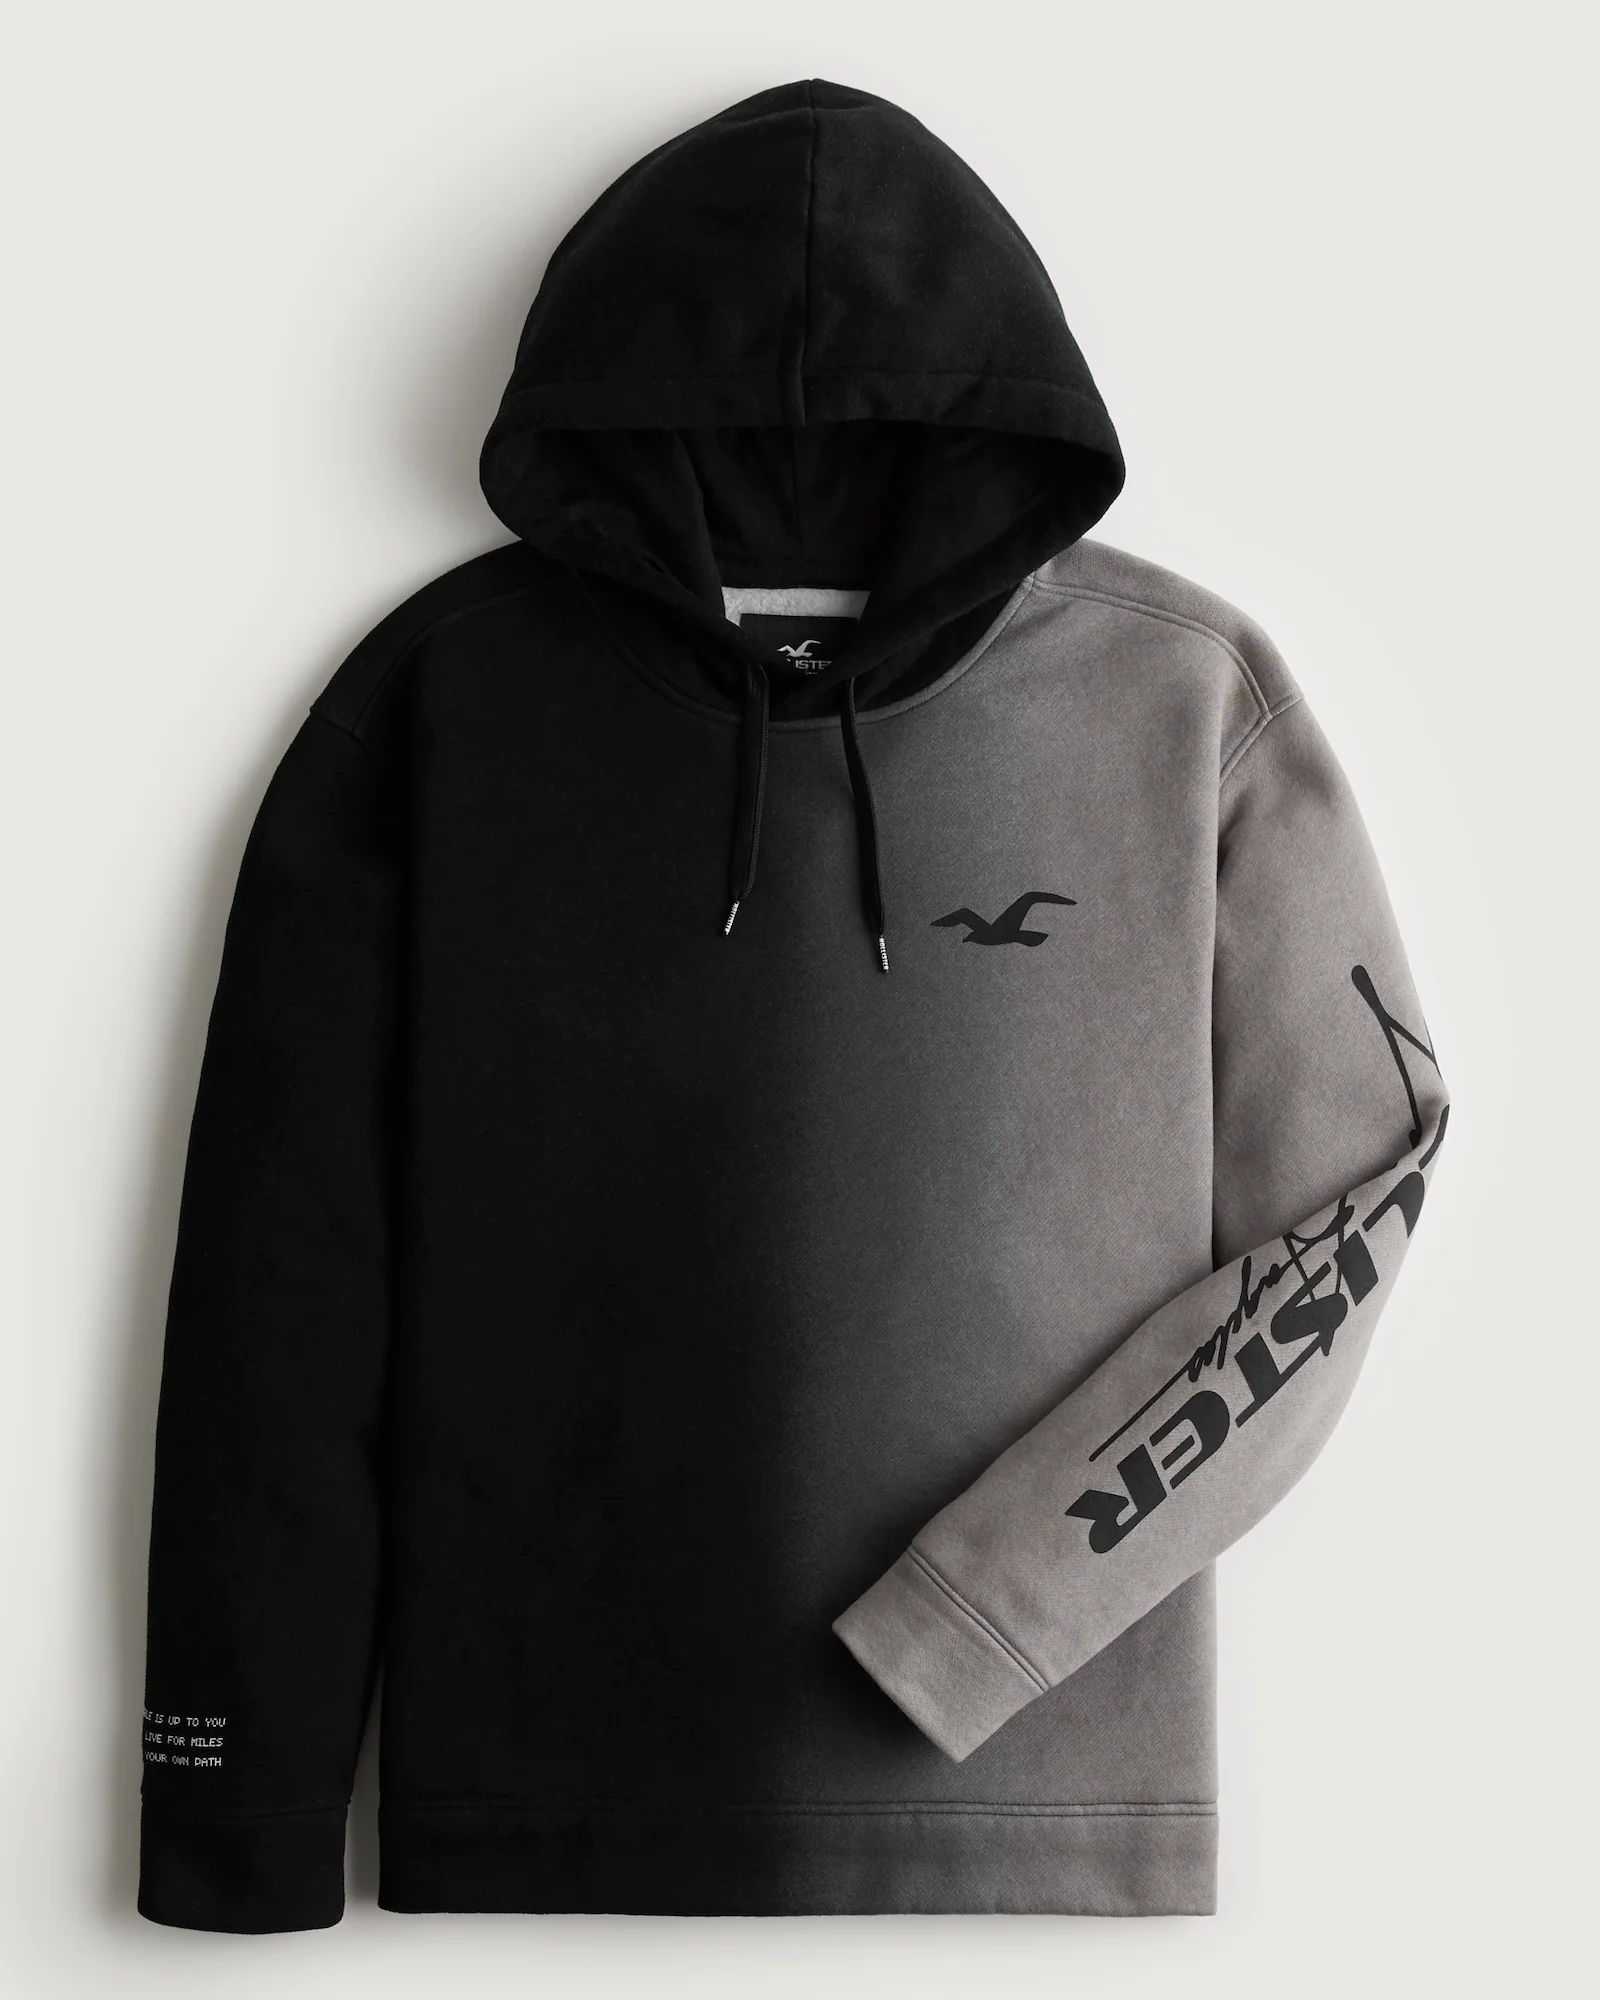 Hollister ombre logo hoodie in gray